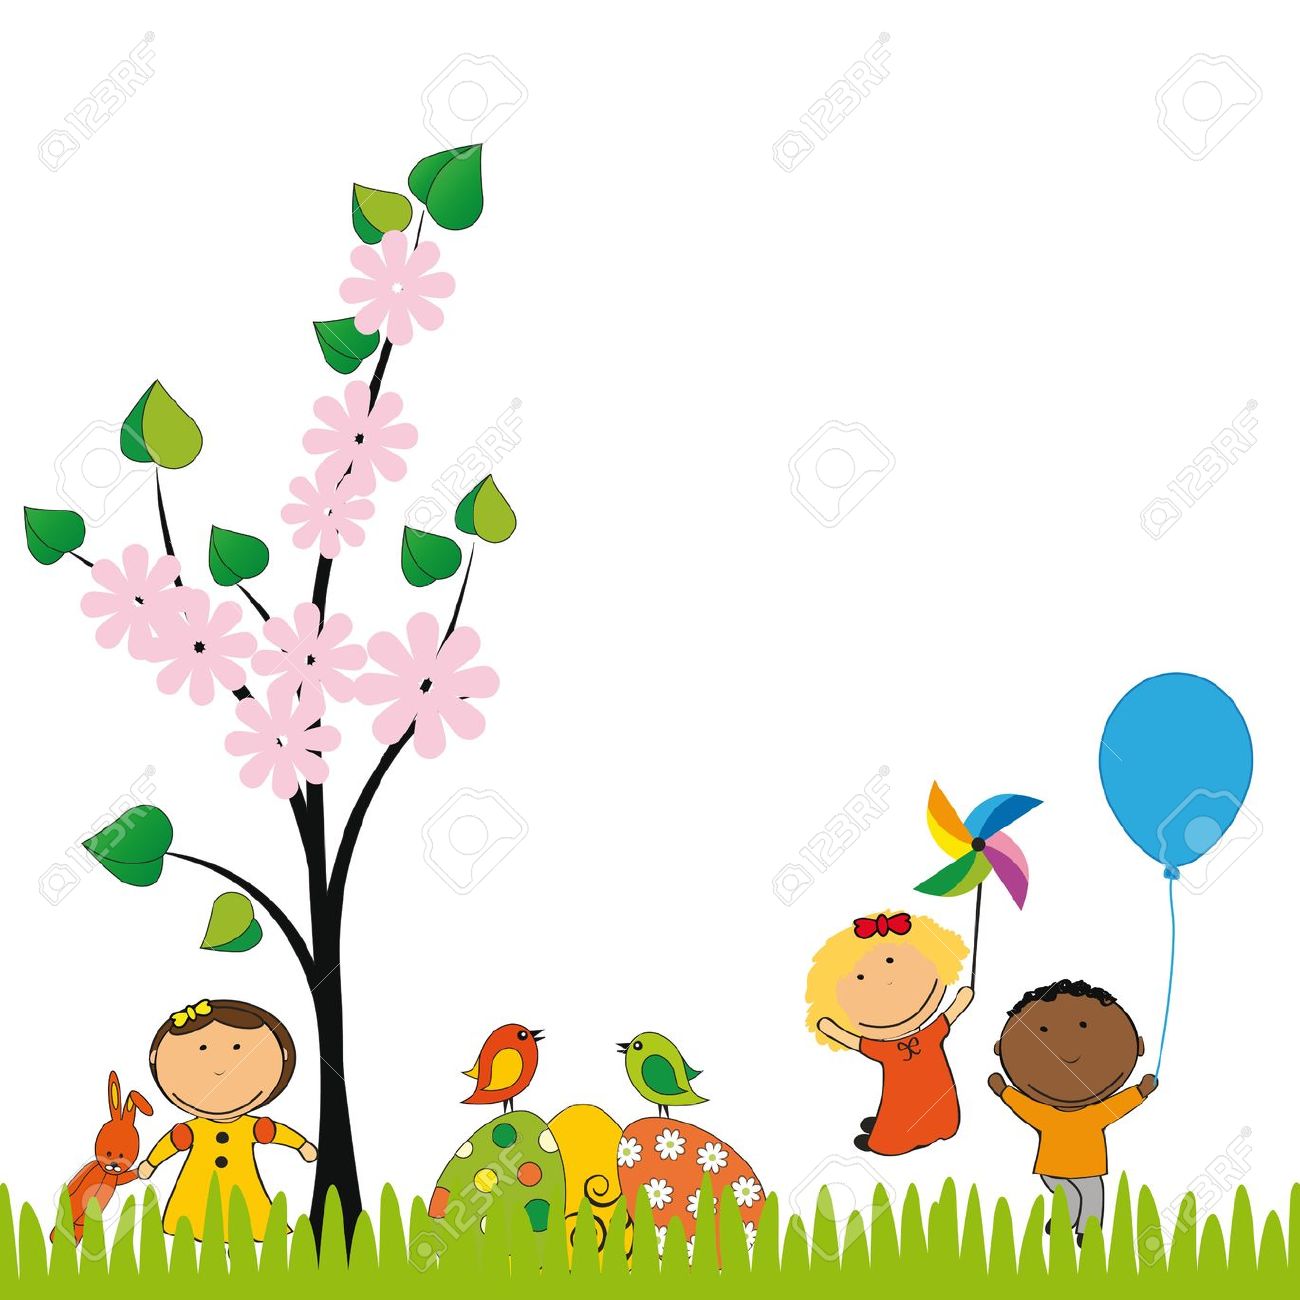 Spring Pictures For Kids Clipart.